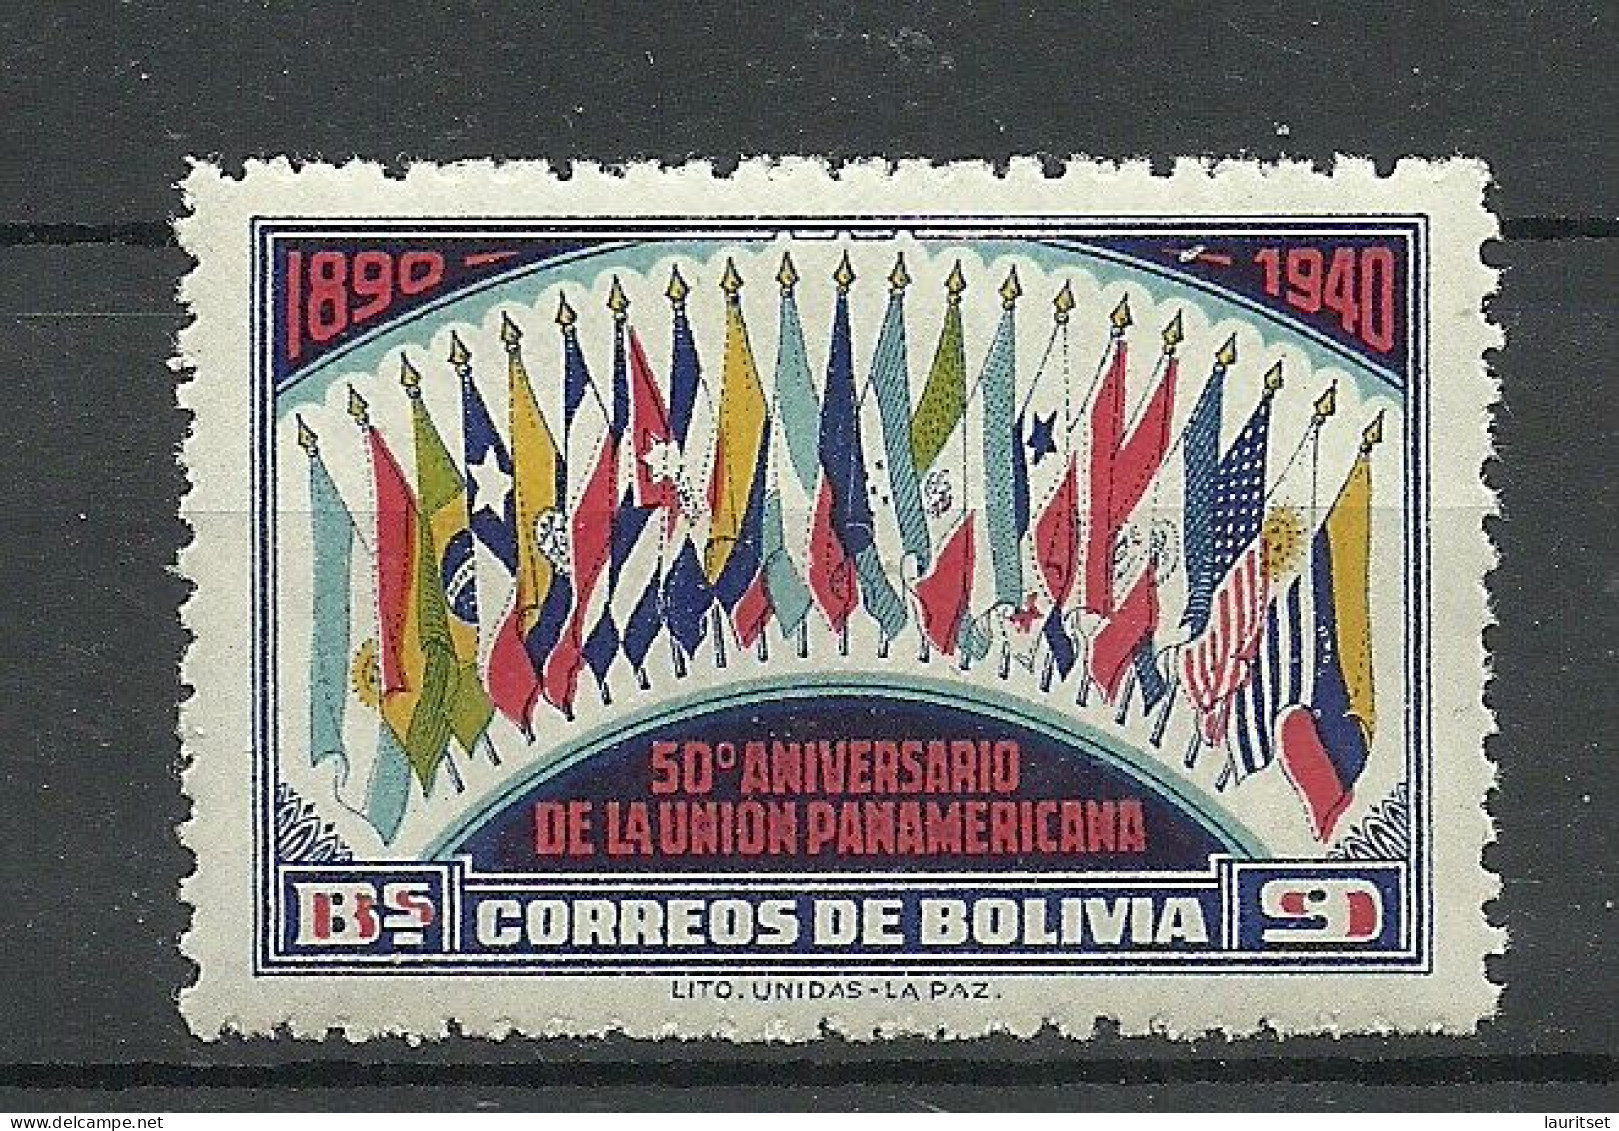 BOLIVIA 1940 Michel 320 MNH Flags Flaggen Pan-American Union - Stamps